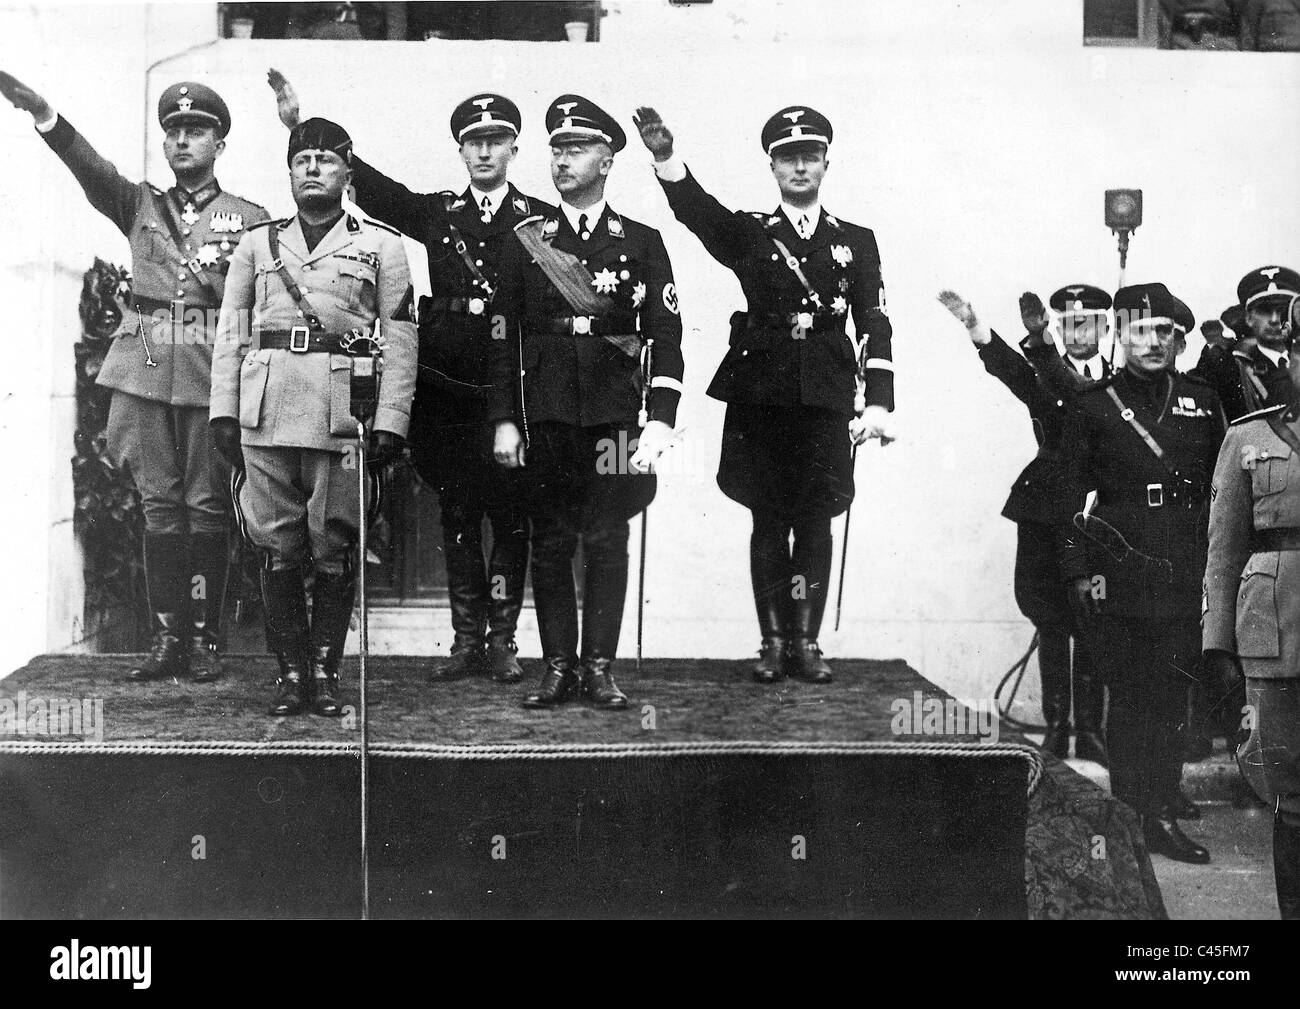 Dalugue, Mussolini, Heydrich, Himmler and Wolf at a tribute Stock Photo